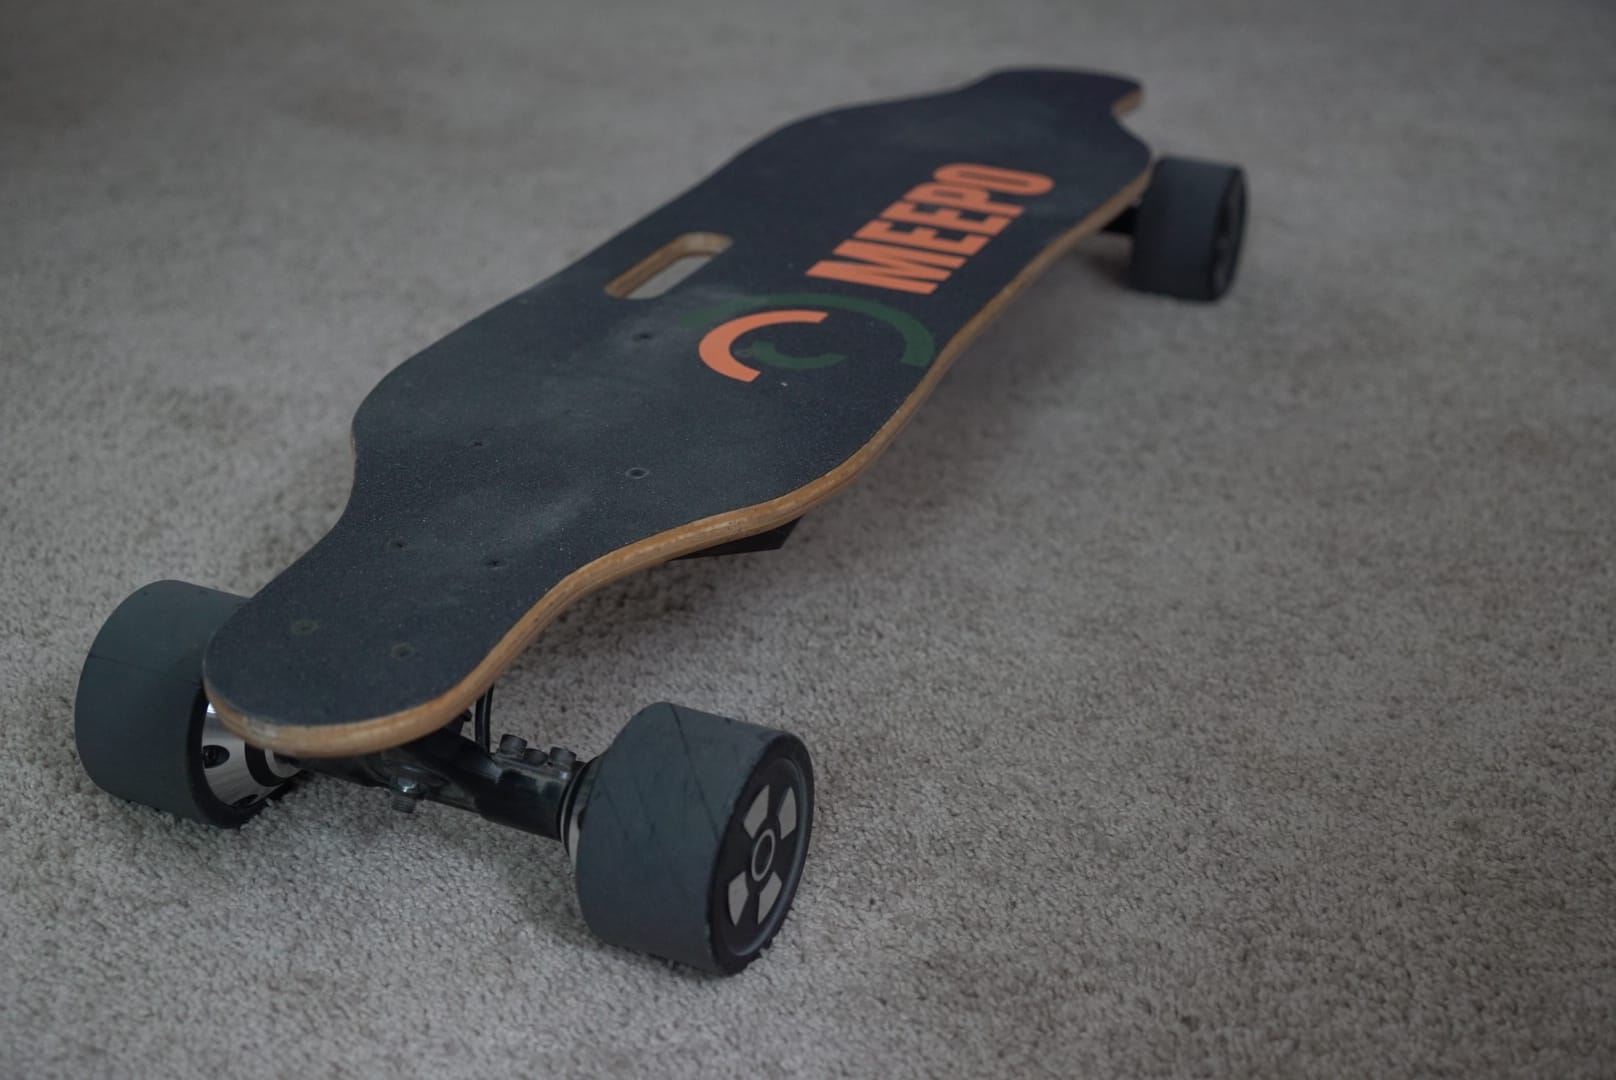 Meepo Board: An Electric Skateboard Review - briancmoses.com